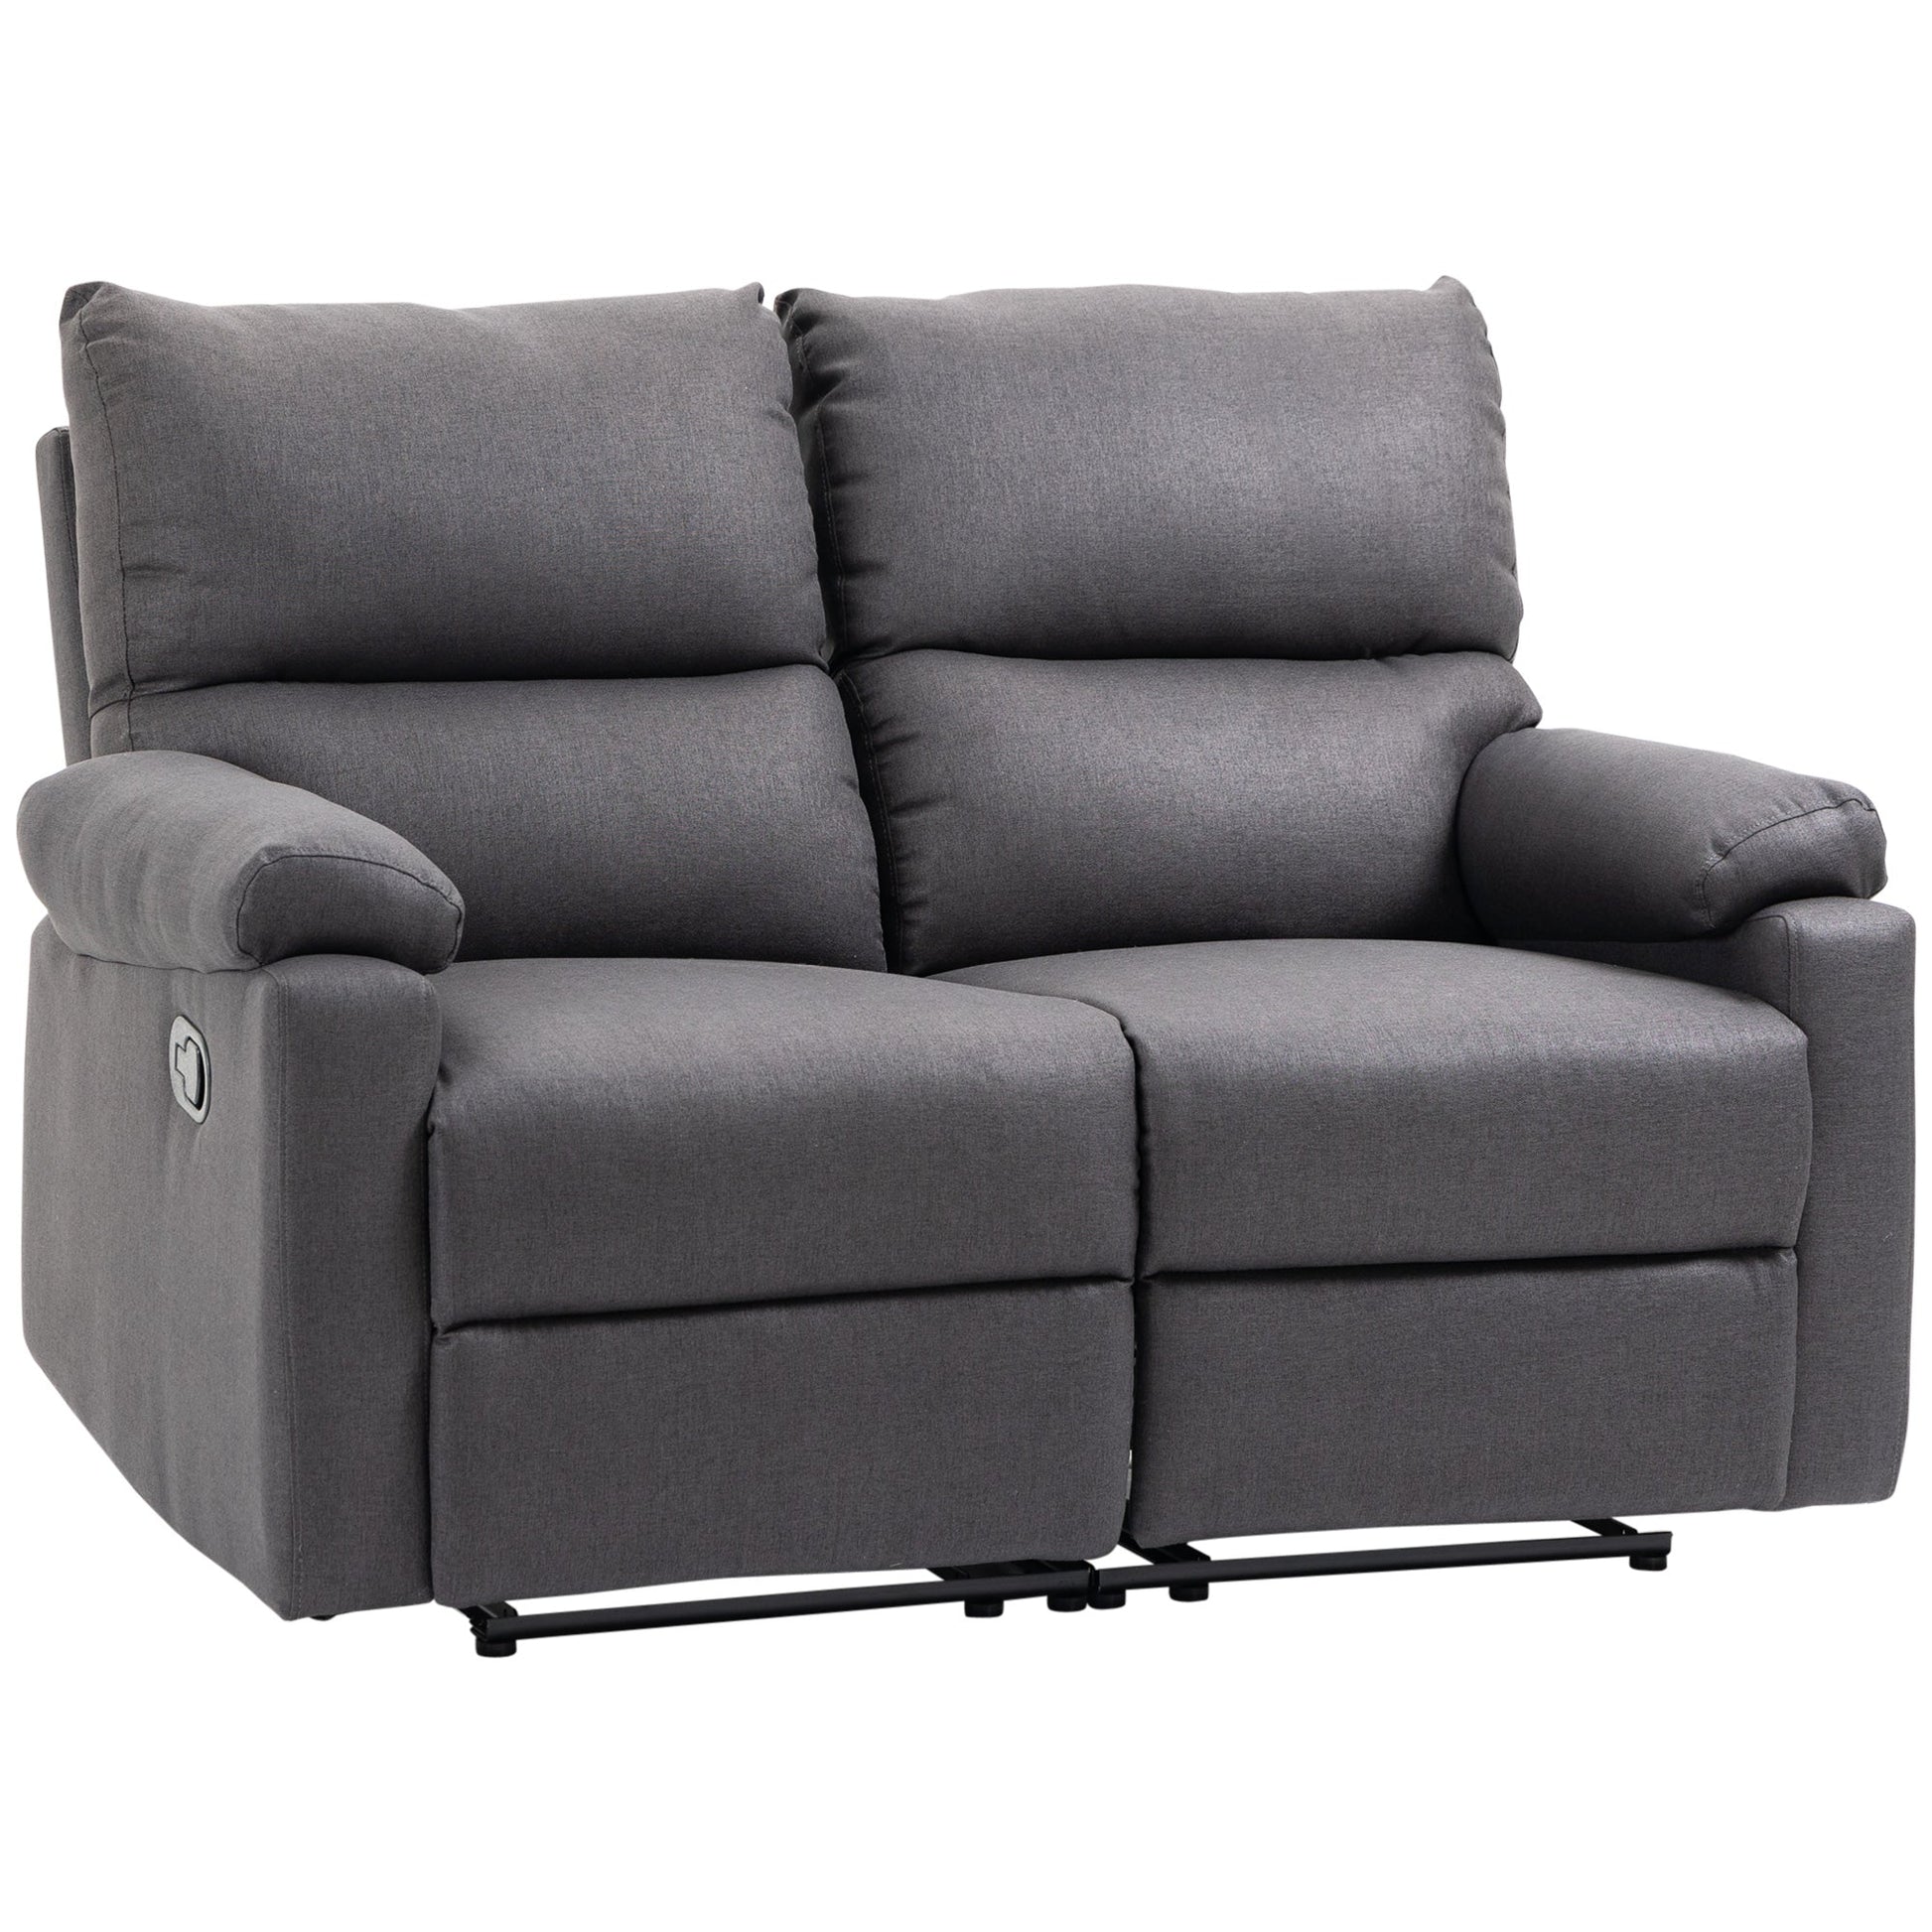 Loveseat Recliner Sofa, 2 Seater Reclining Chair with Footrest and Split Backrest, Dark Grey - Gallery Canada